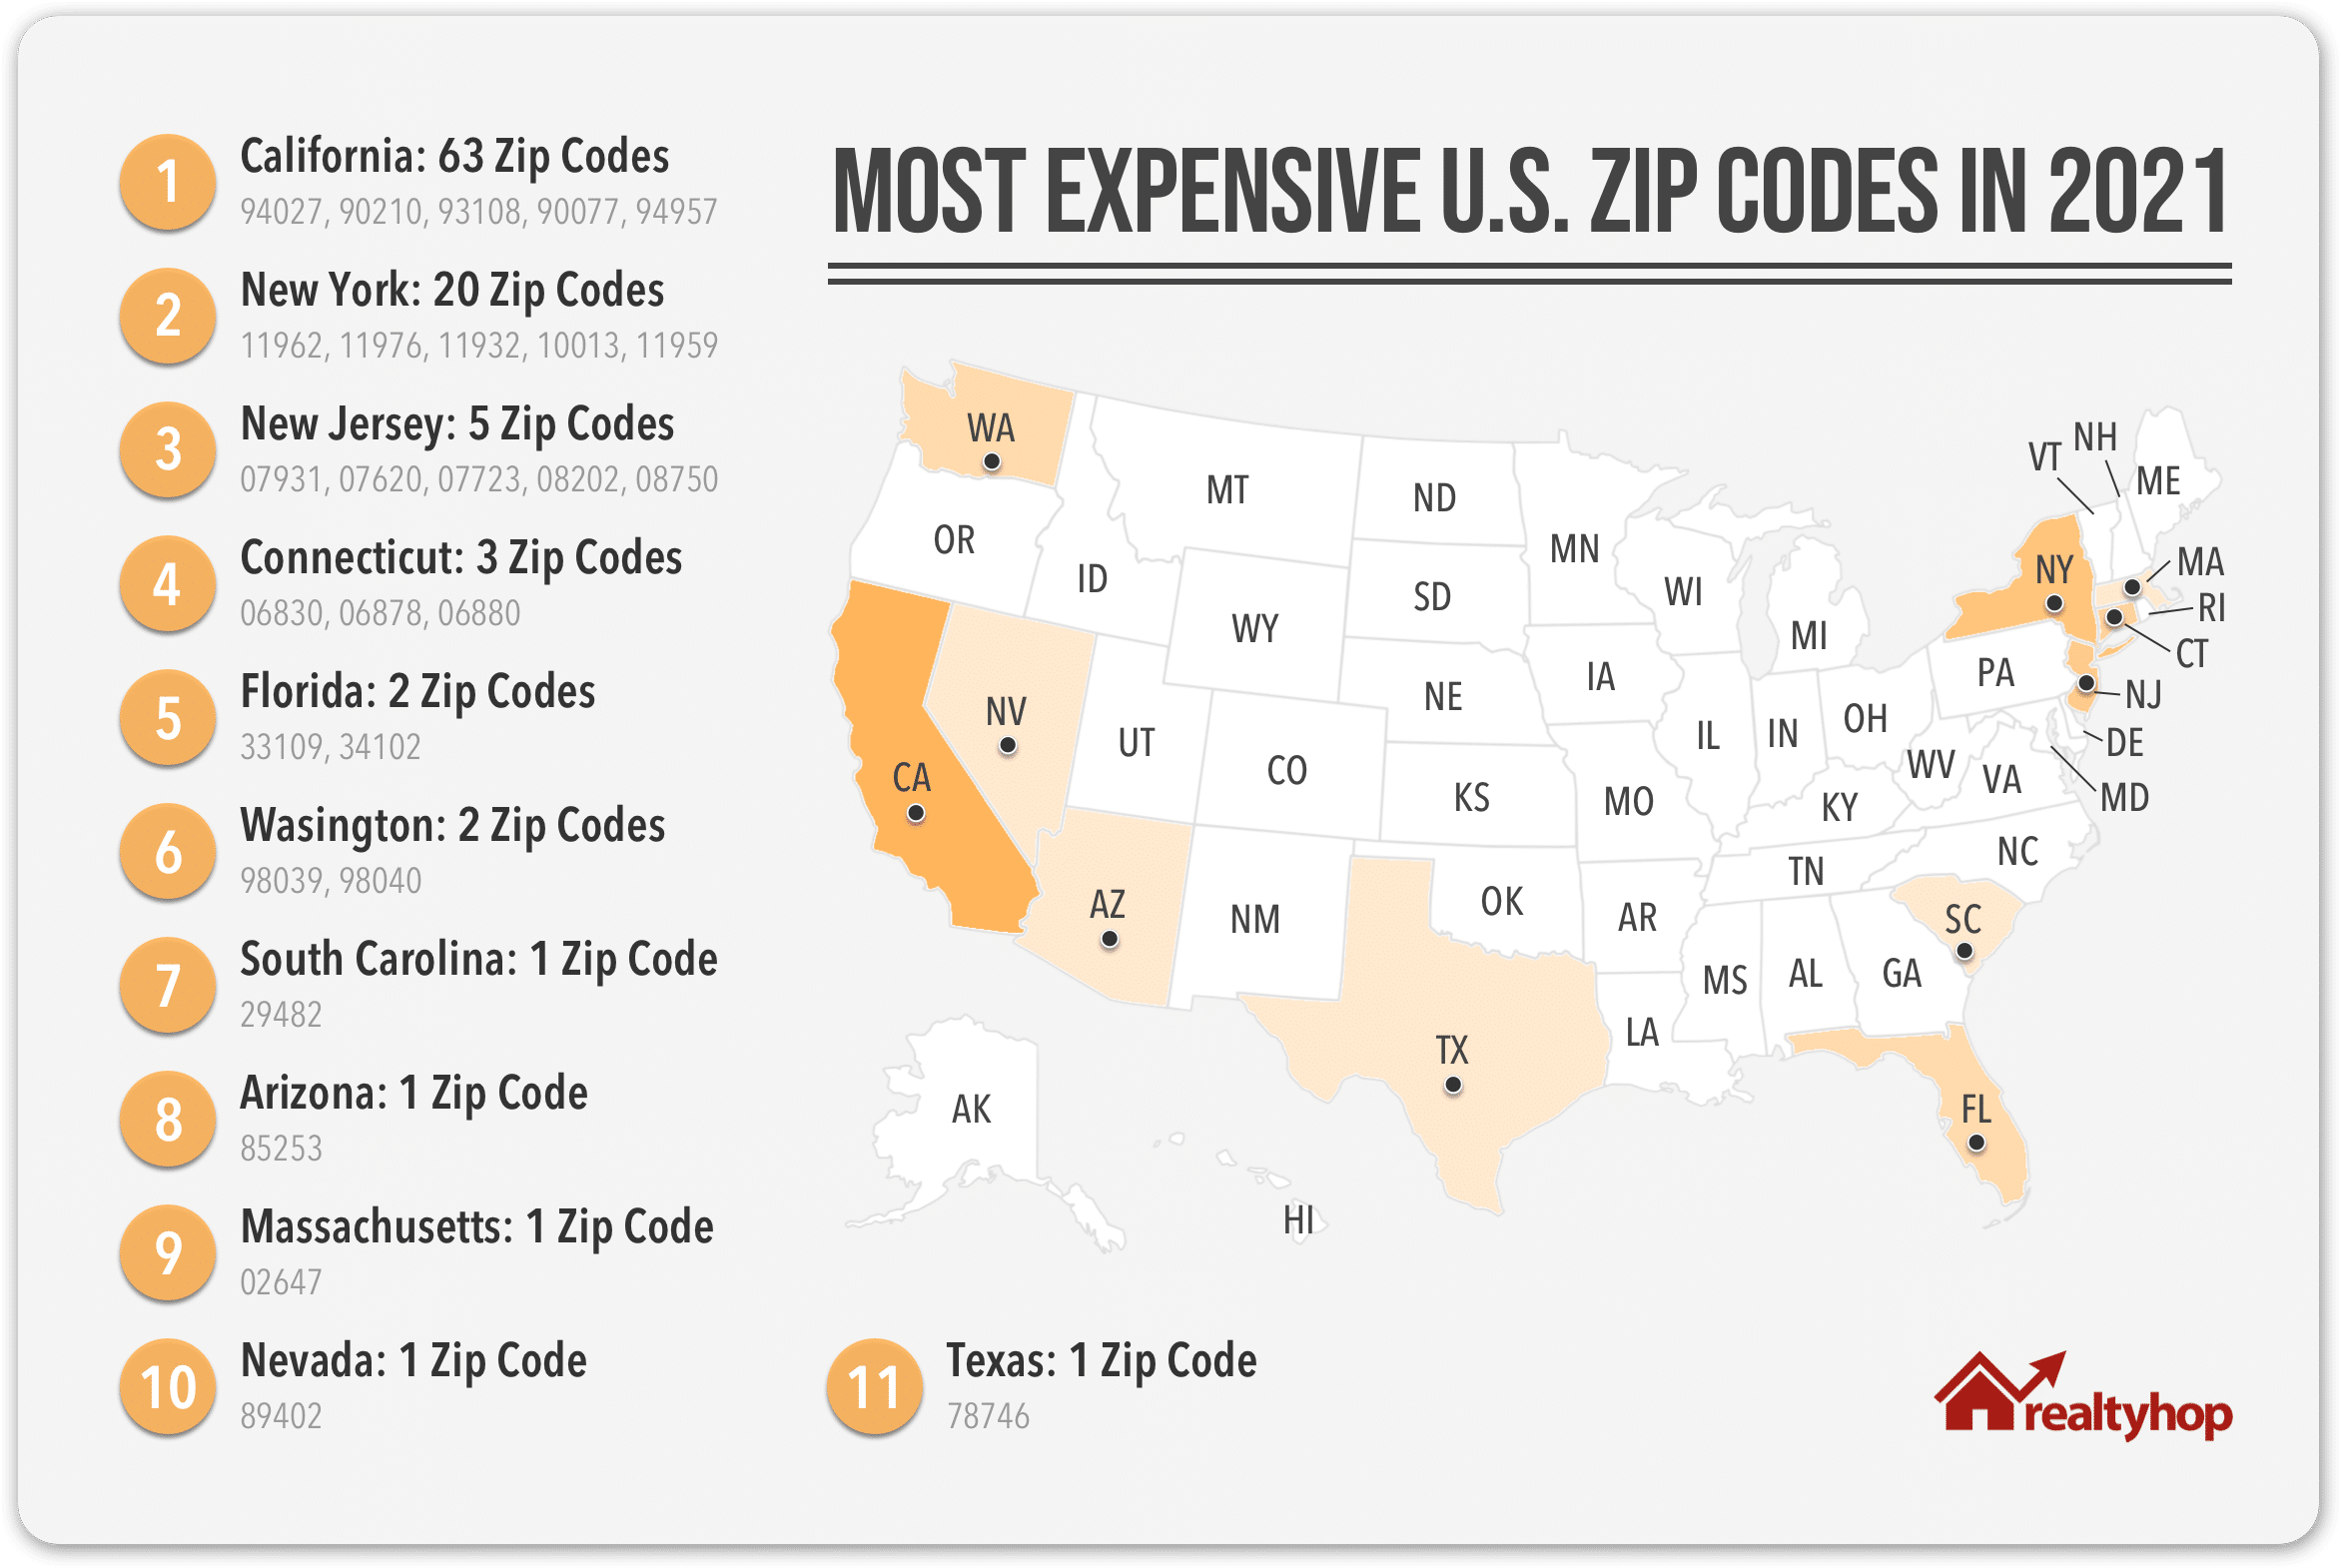 The Most Expensive U.S. Zip Codes in 2021 - RealtyHop Blog